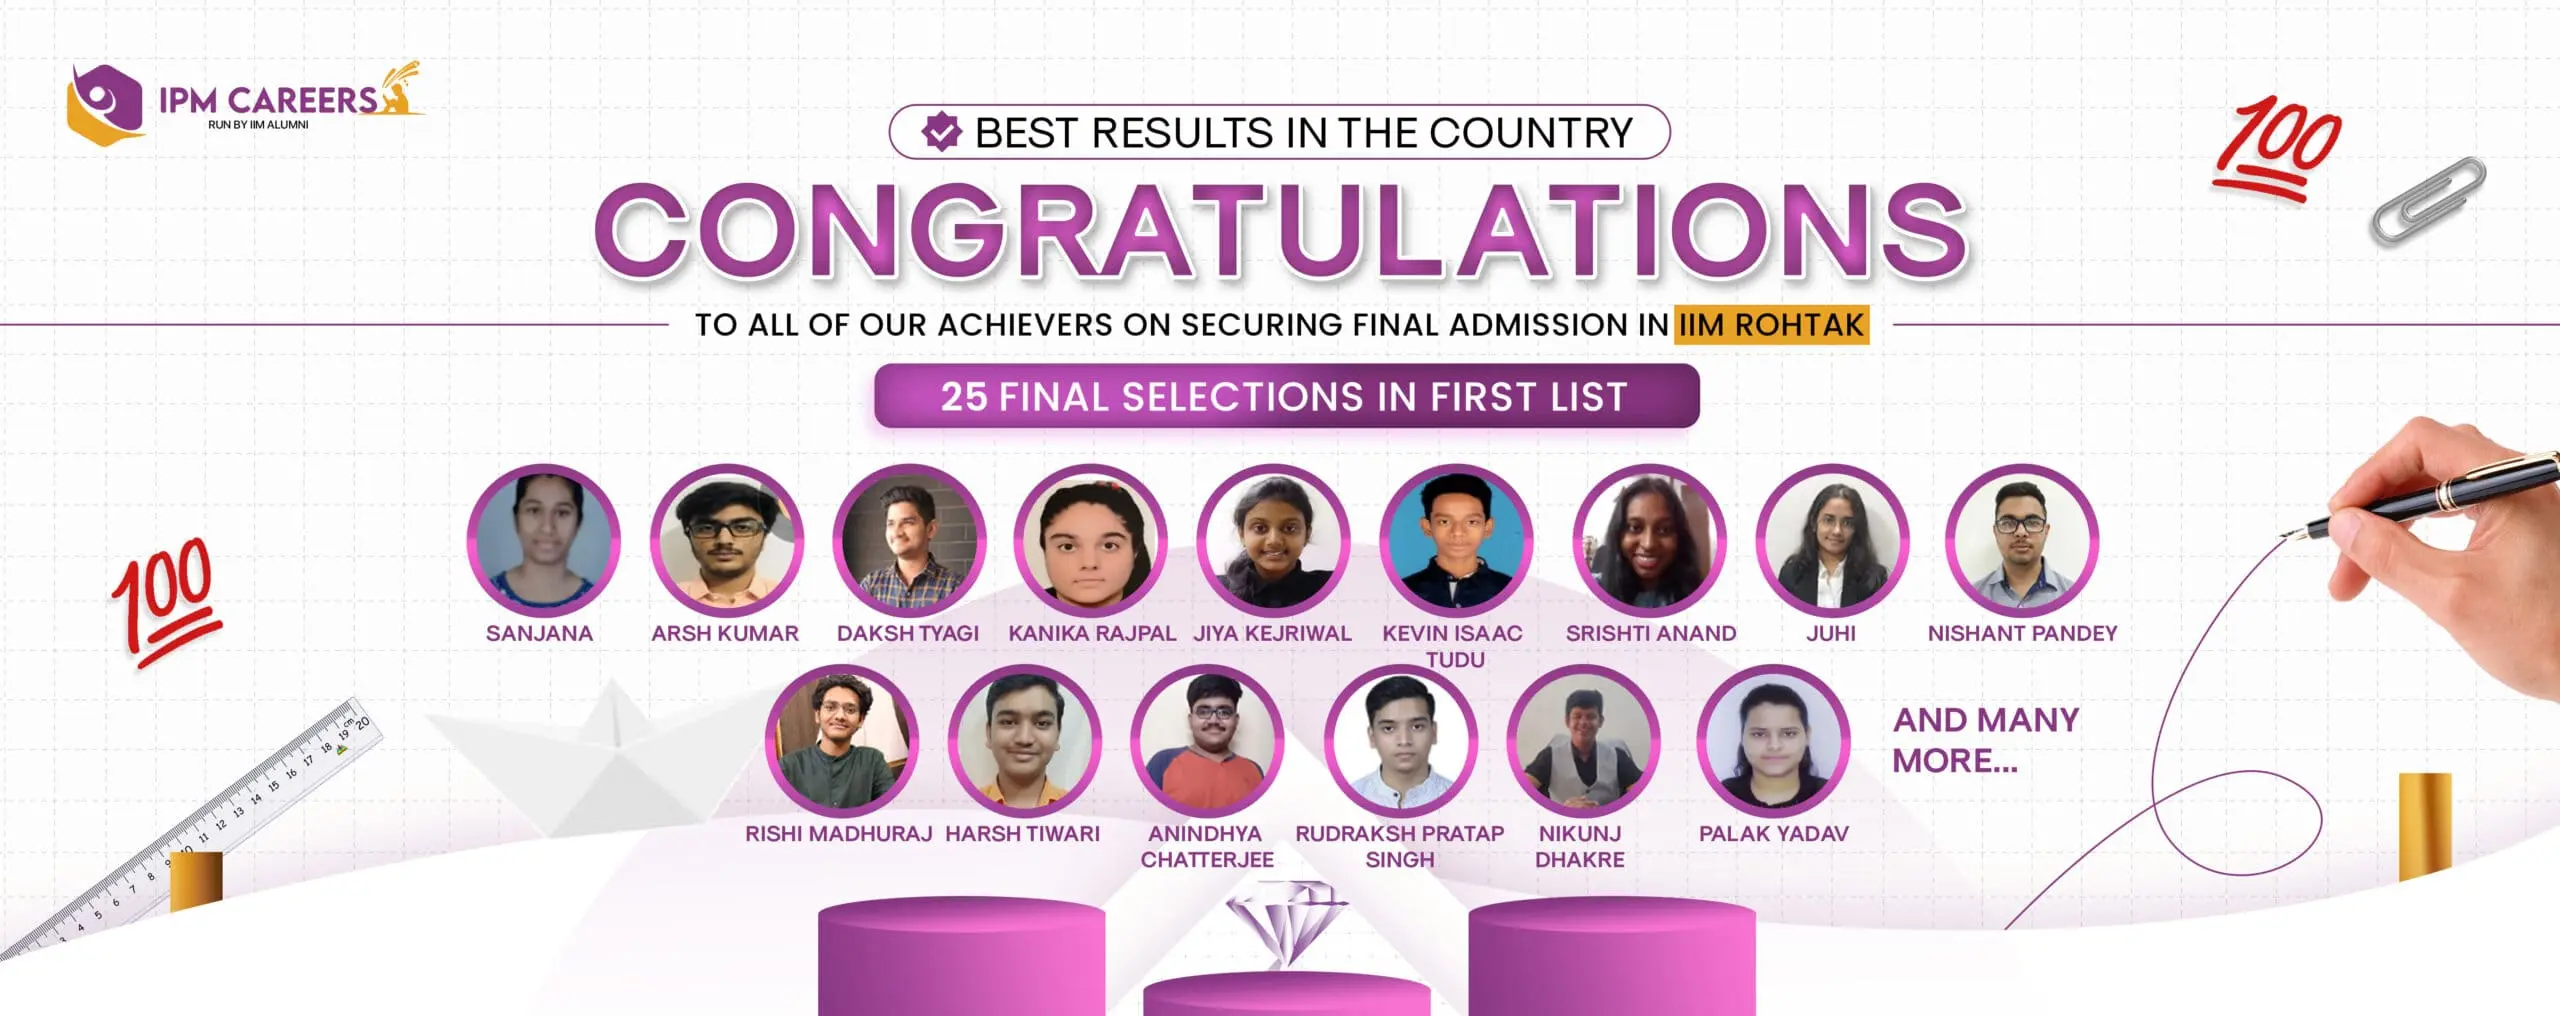 IPM Careers Rohtak Results